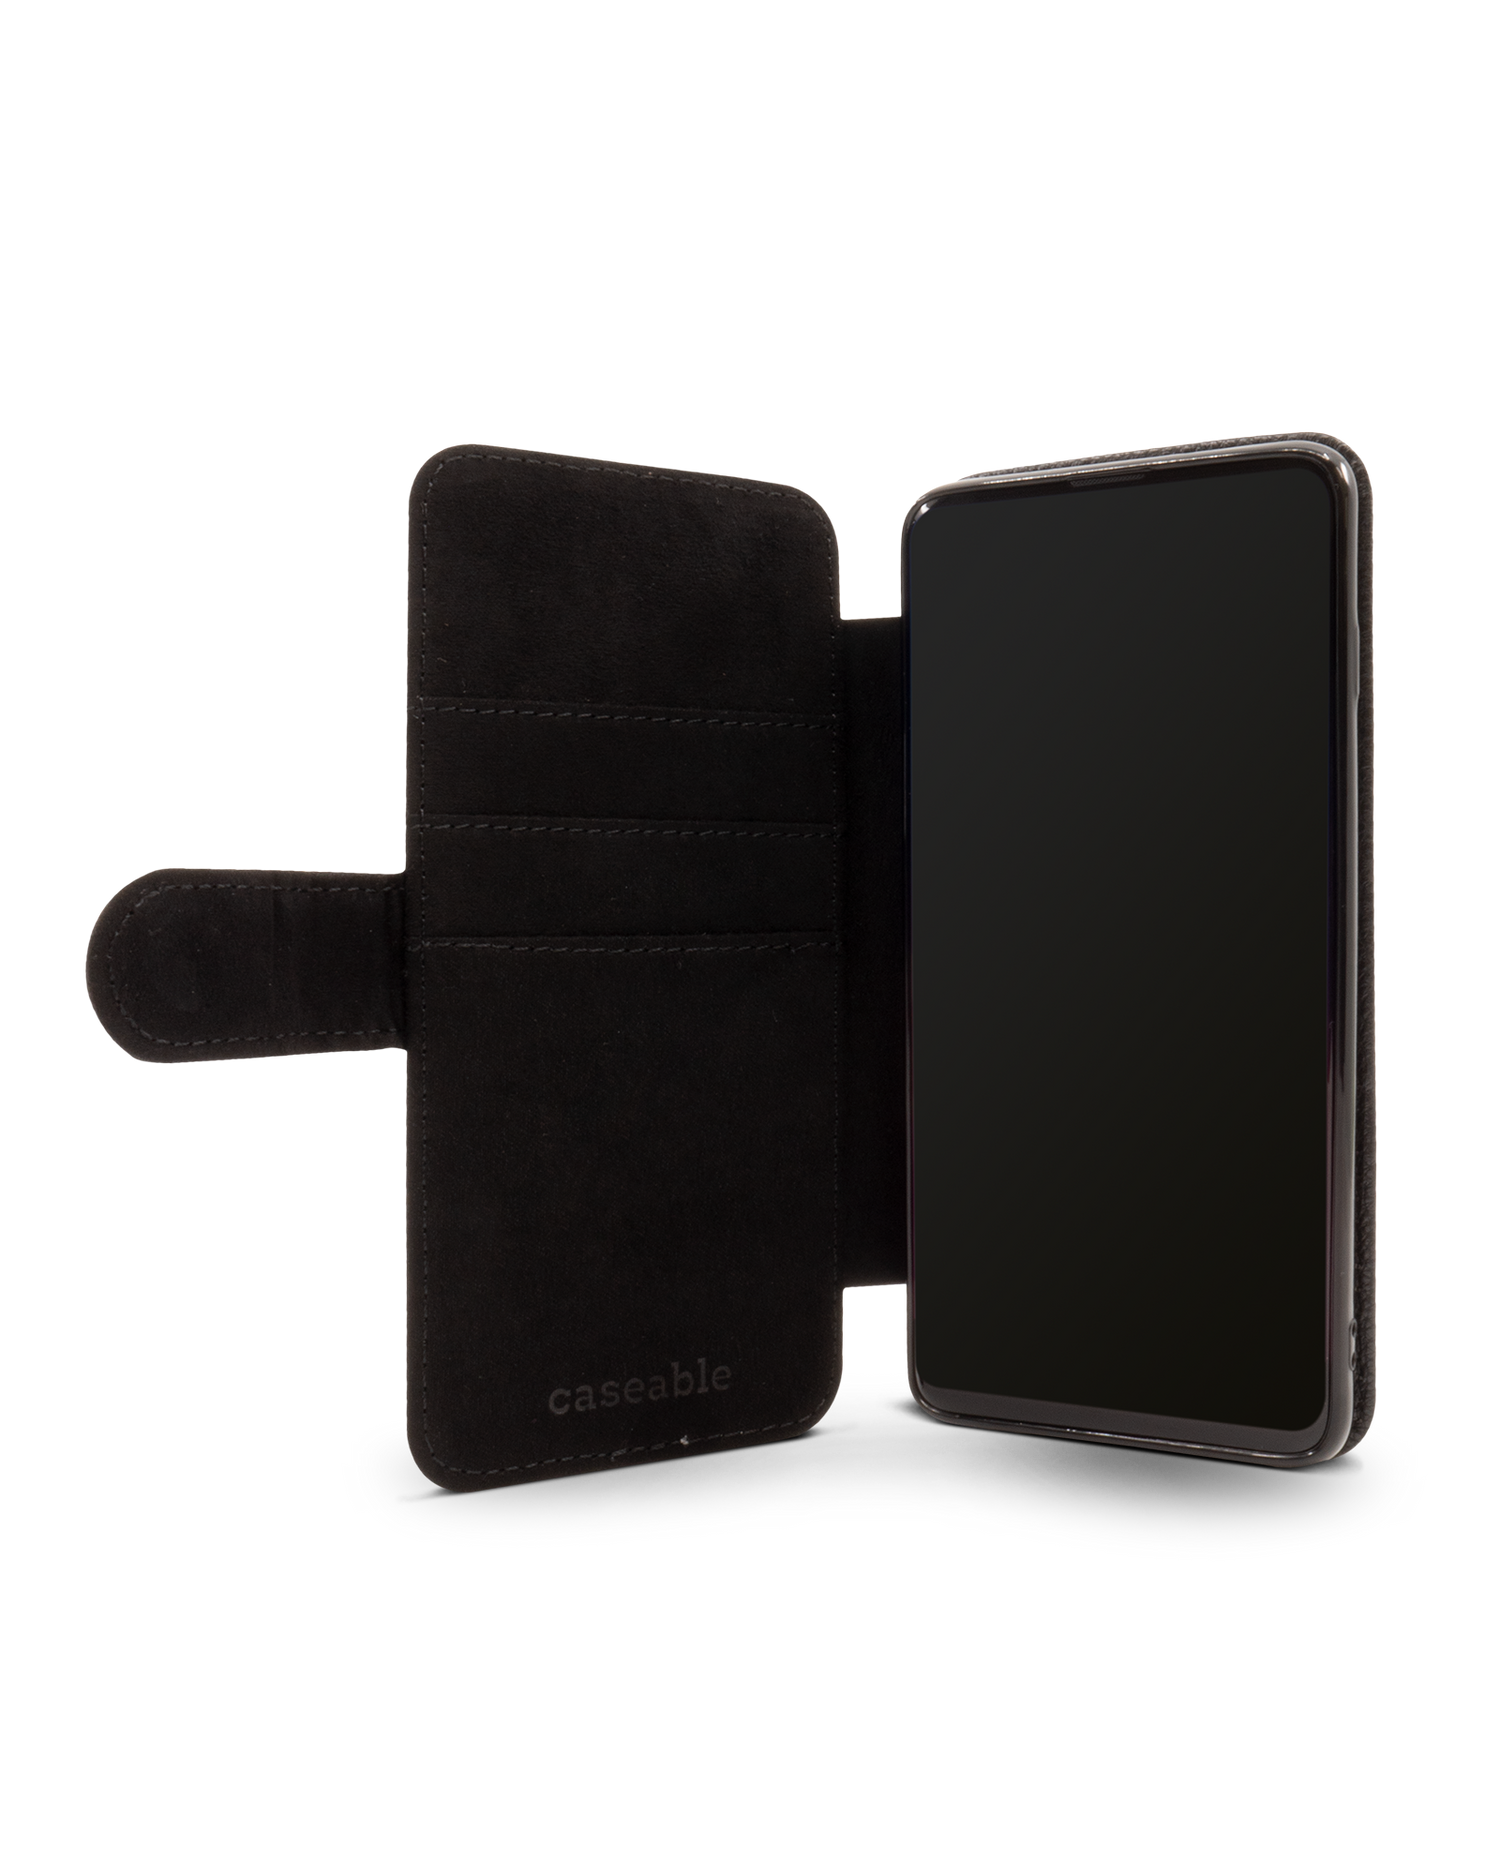 Grids Wallet Phone Case Samsung Galaxy S10: Inside View